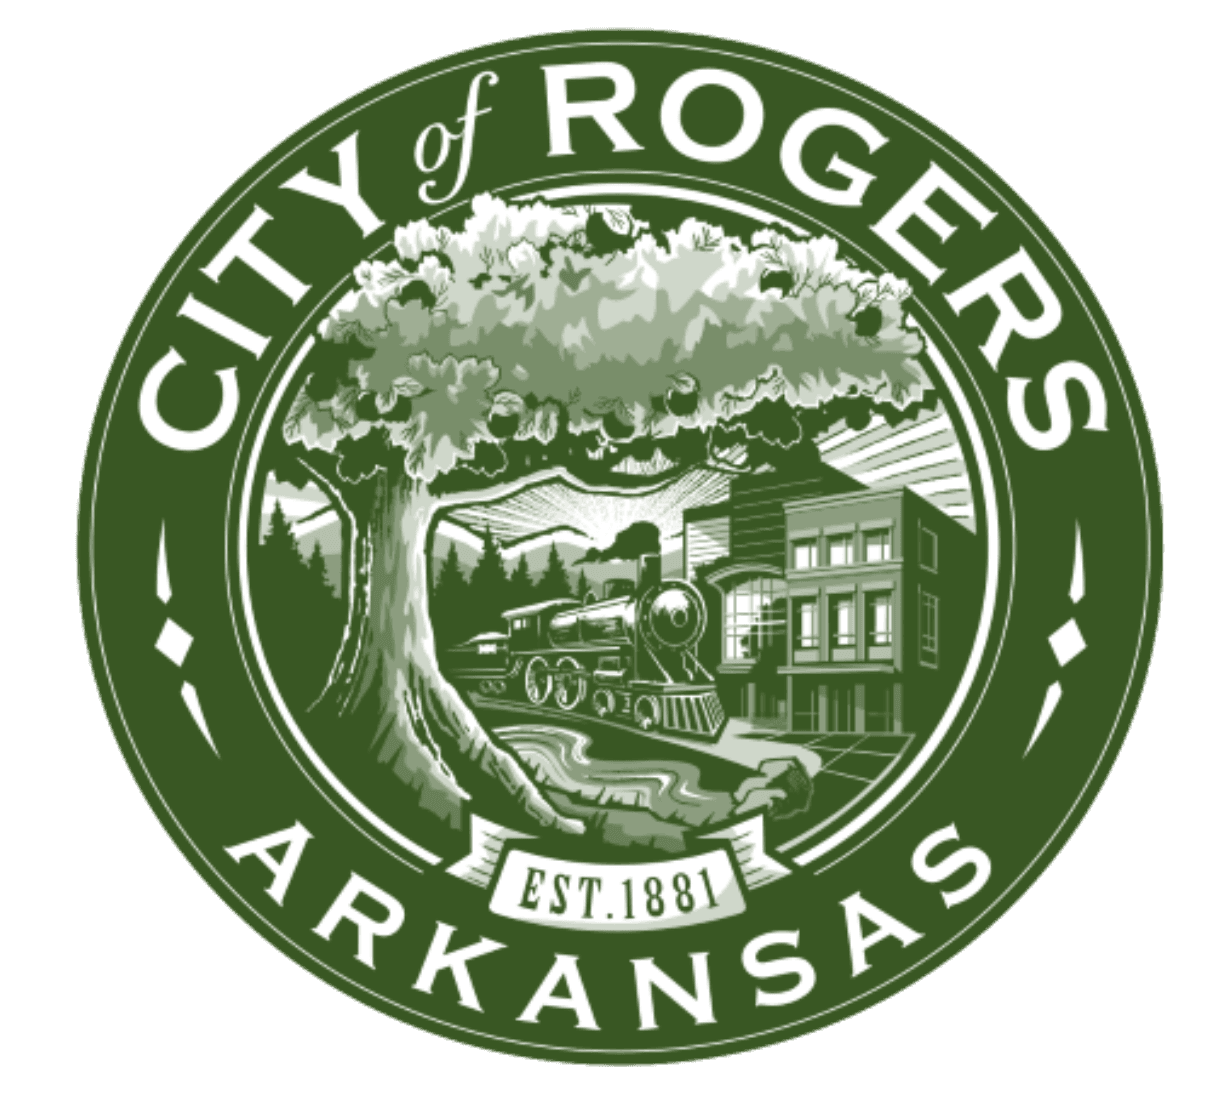 Green Seal of Rogers